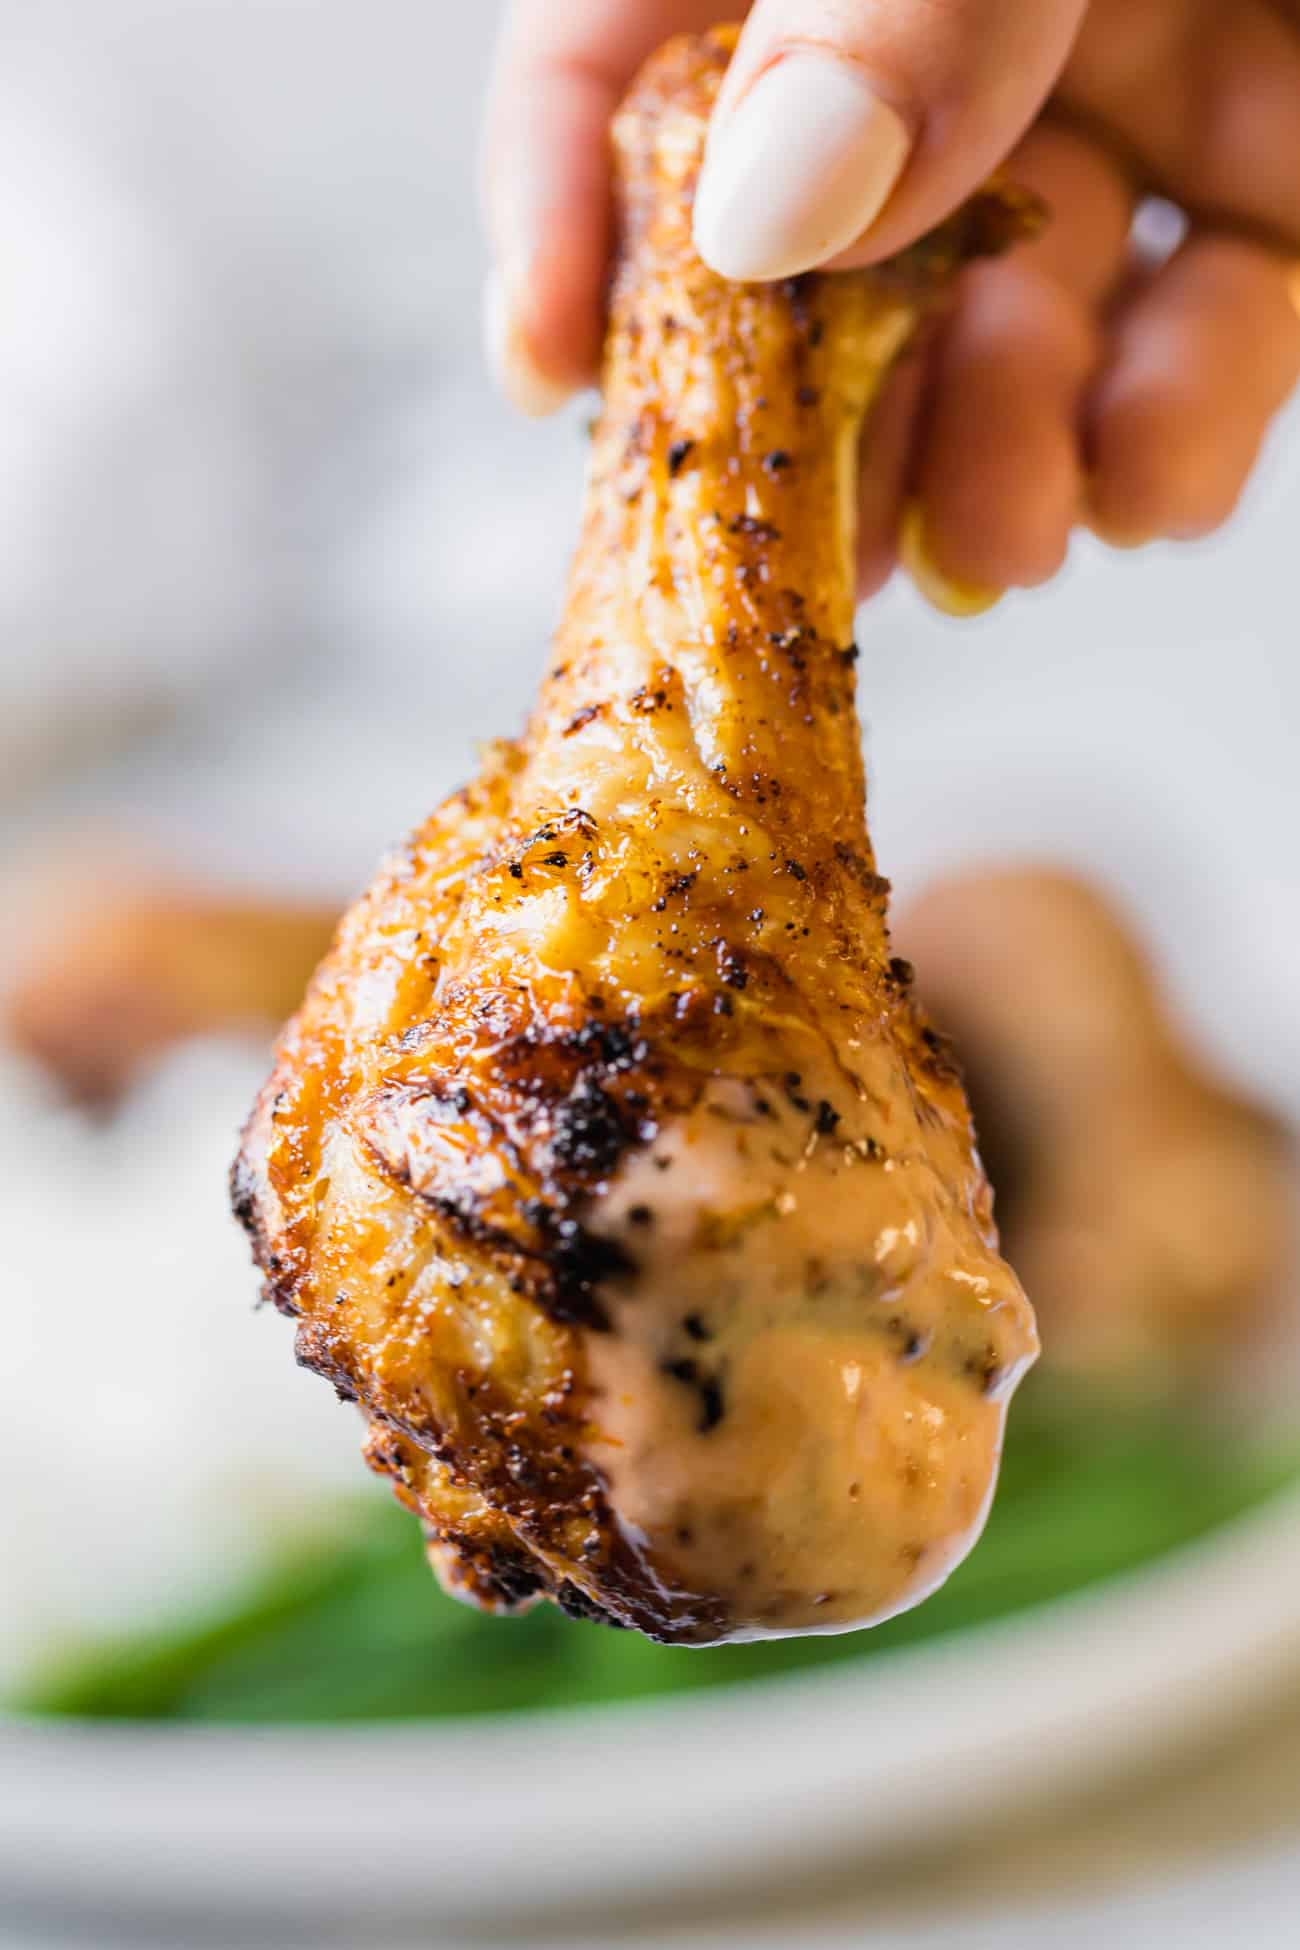 Chicken drumsticks being held dipped in a creamy sauce